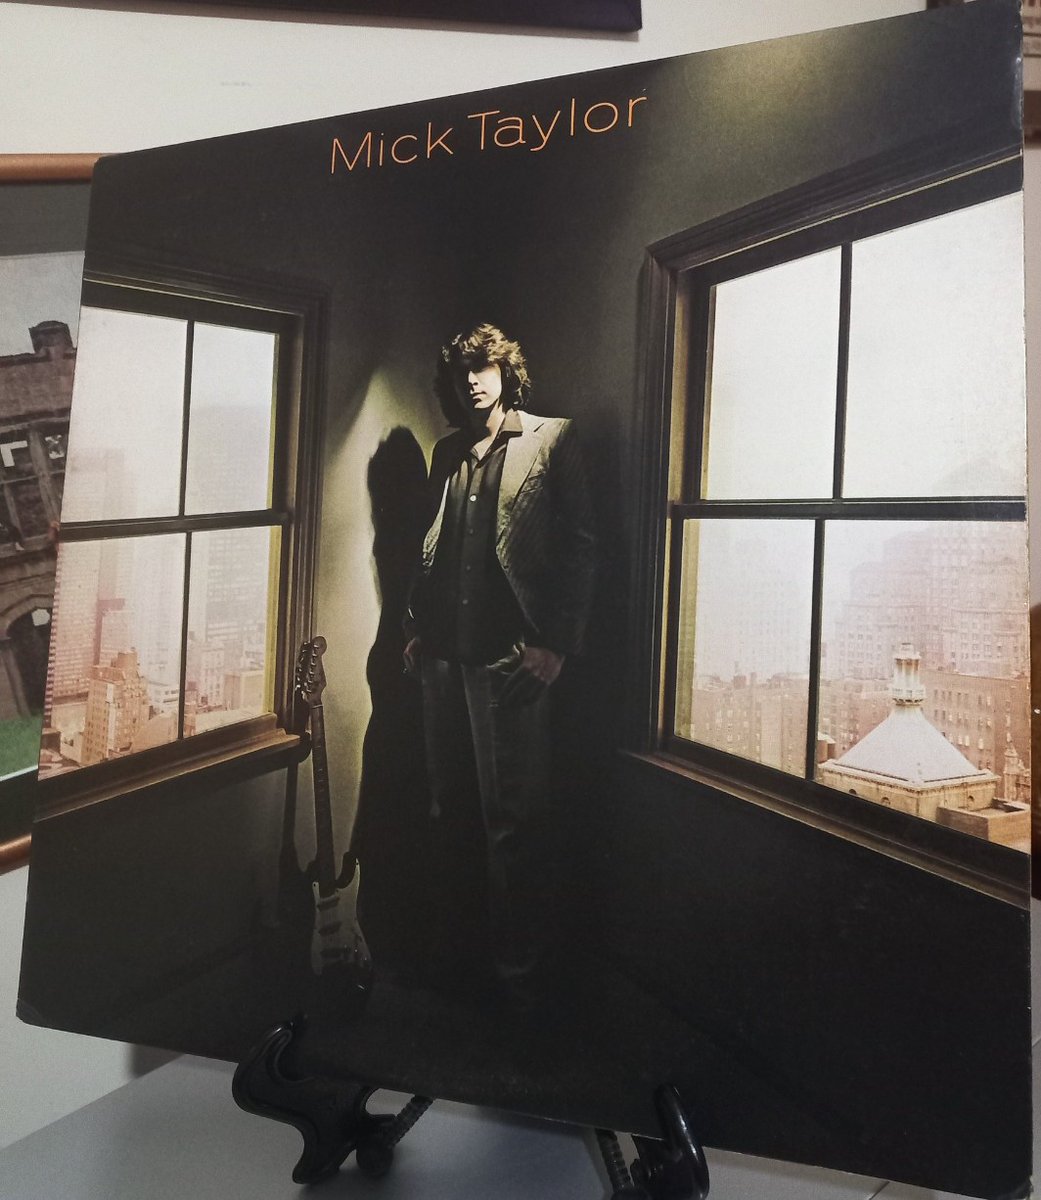 Mick Taylor is the first studio album by former Rolling Stones guitarist Mick Taylor, released in 1979. 
Very well executed album. At the time it was critically acclaimed. #MickTaylor